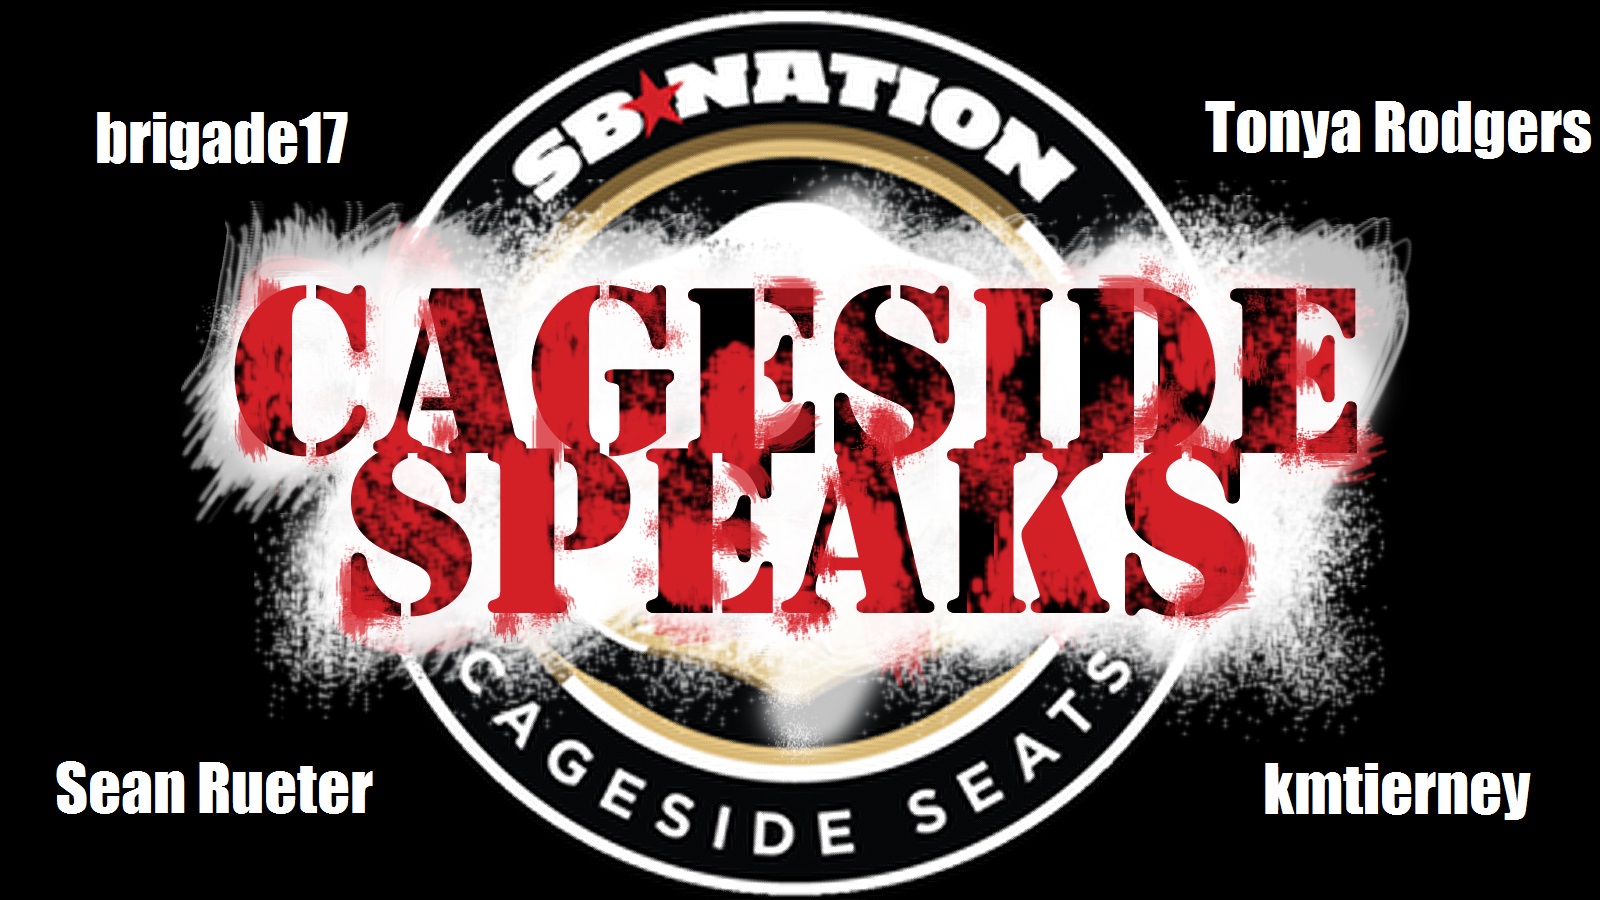 Cageside Speaks logo by TheDannyBaxter